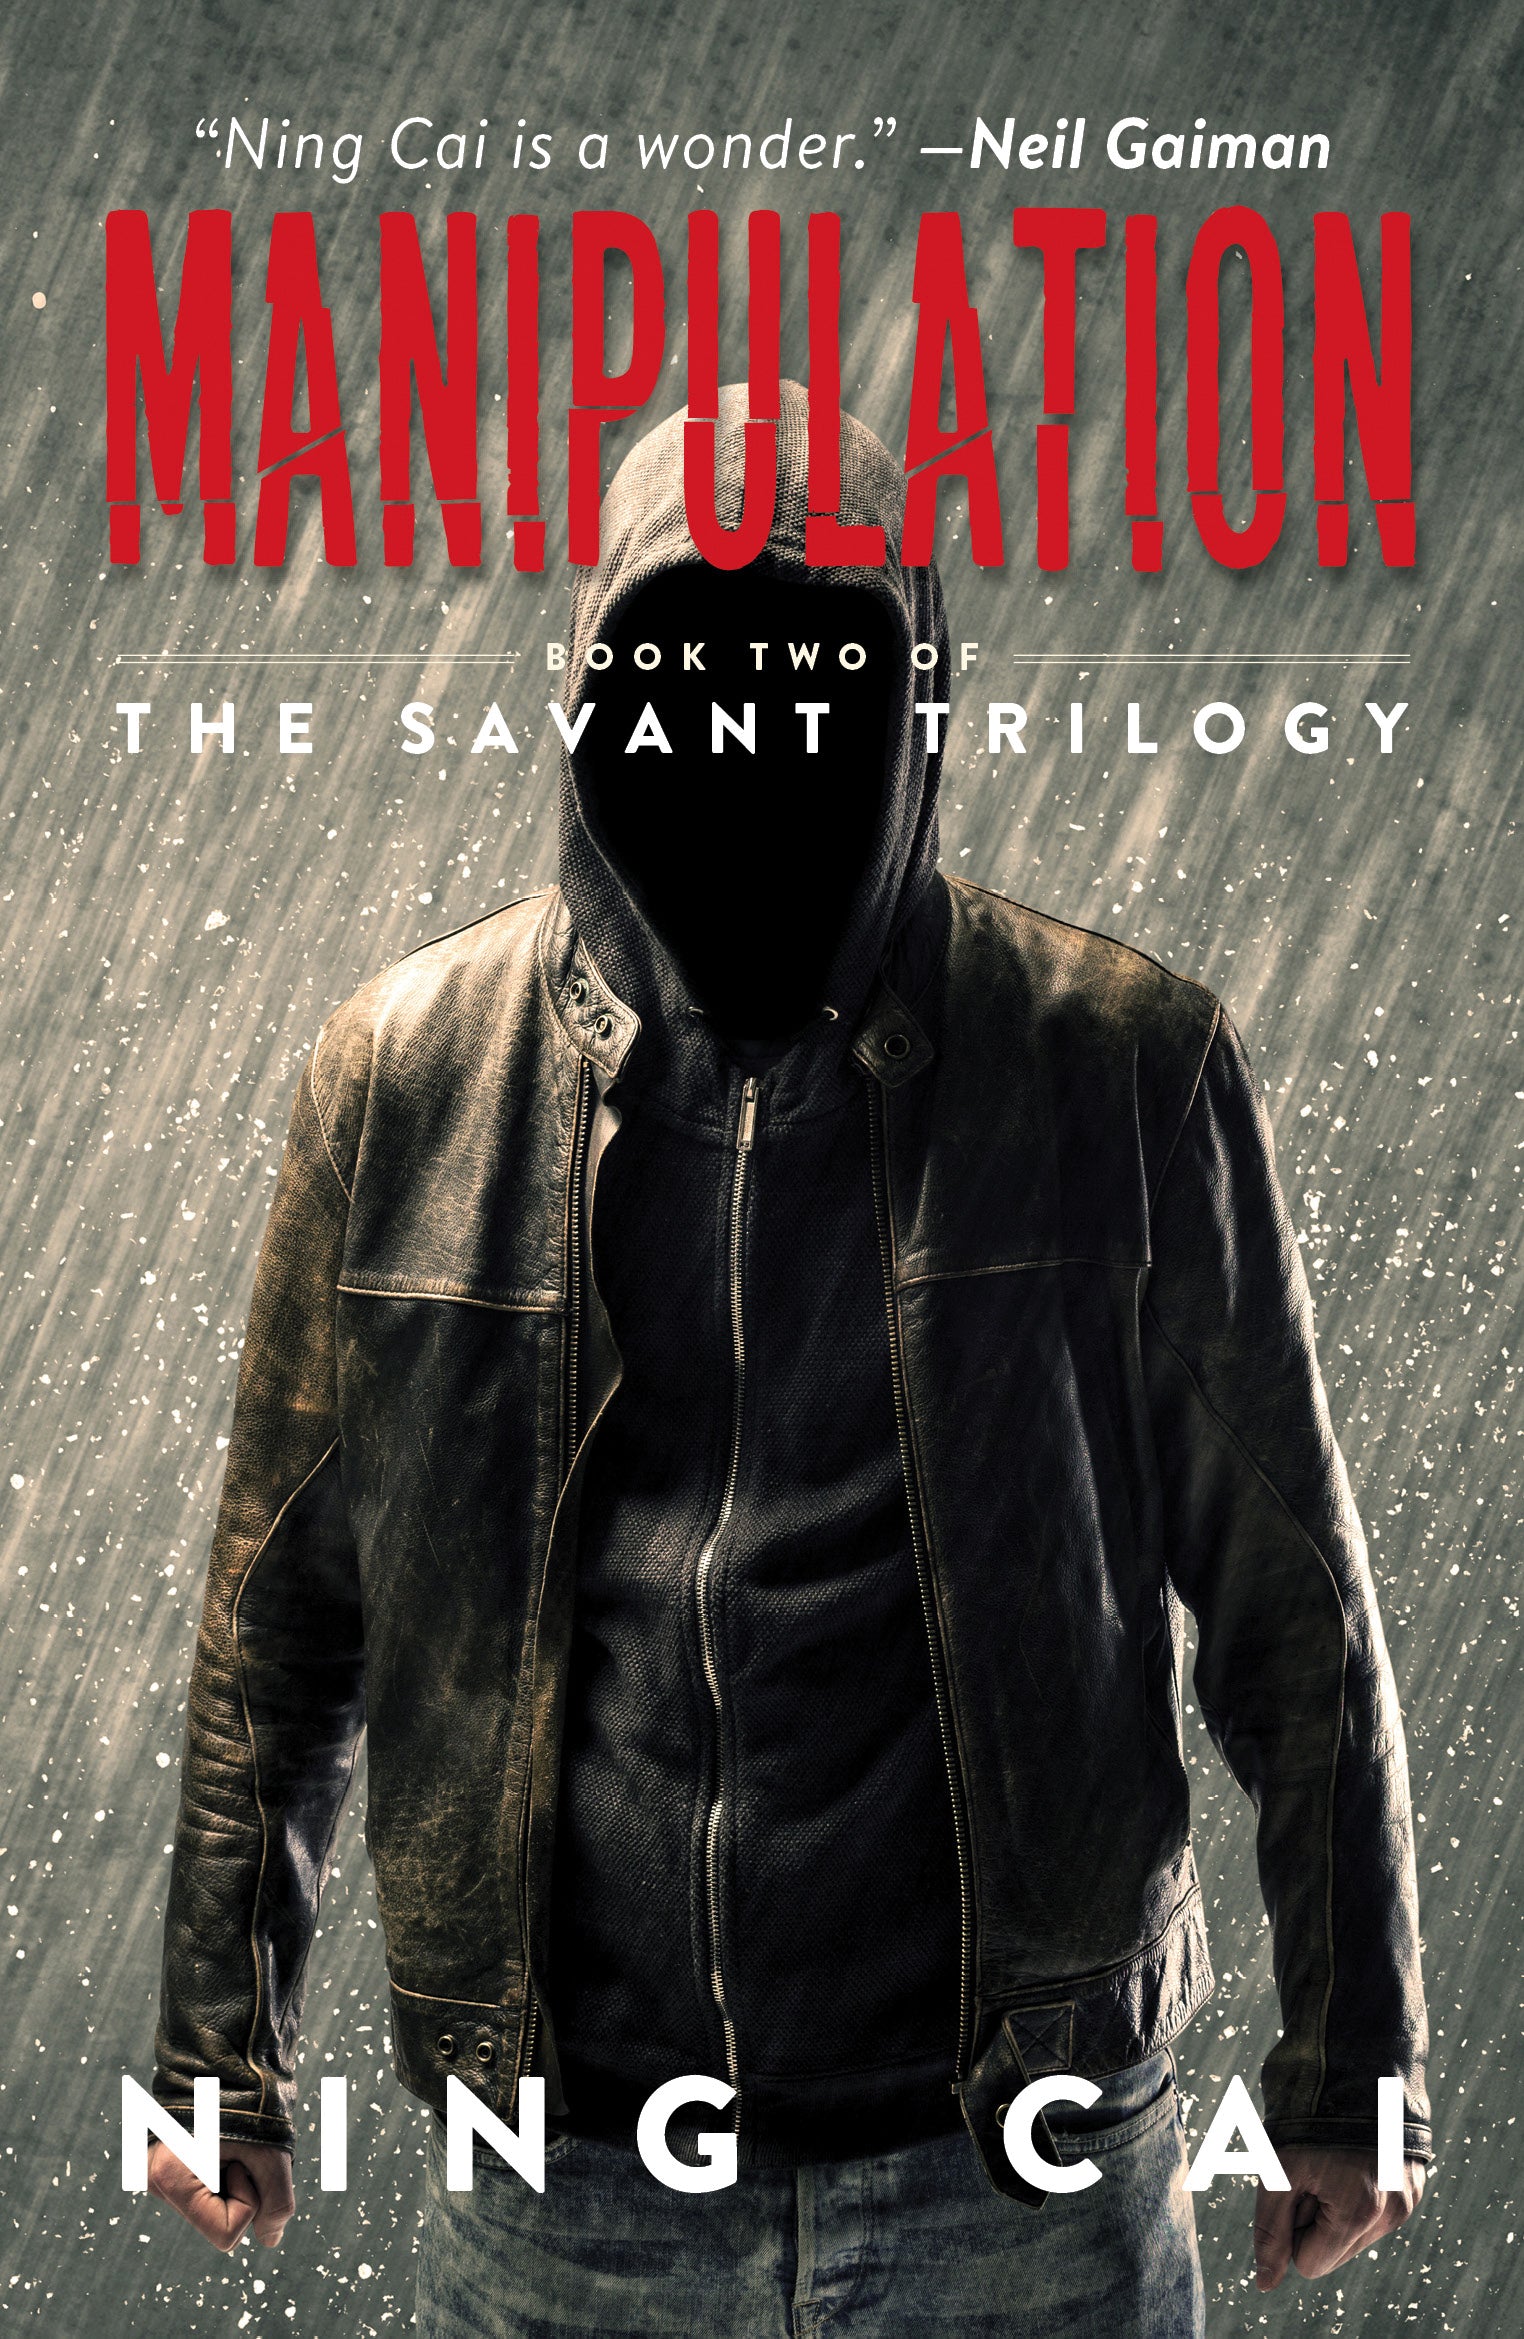 Manipulation (Book Two of The Savant Trilogy)